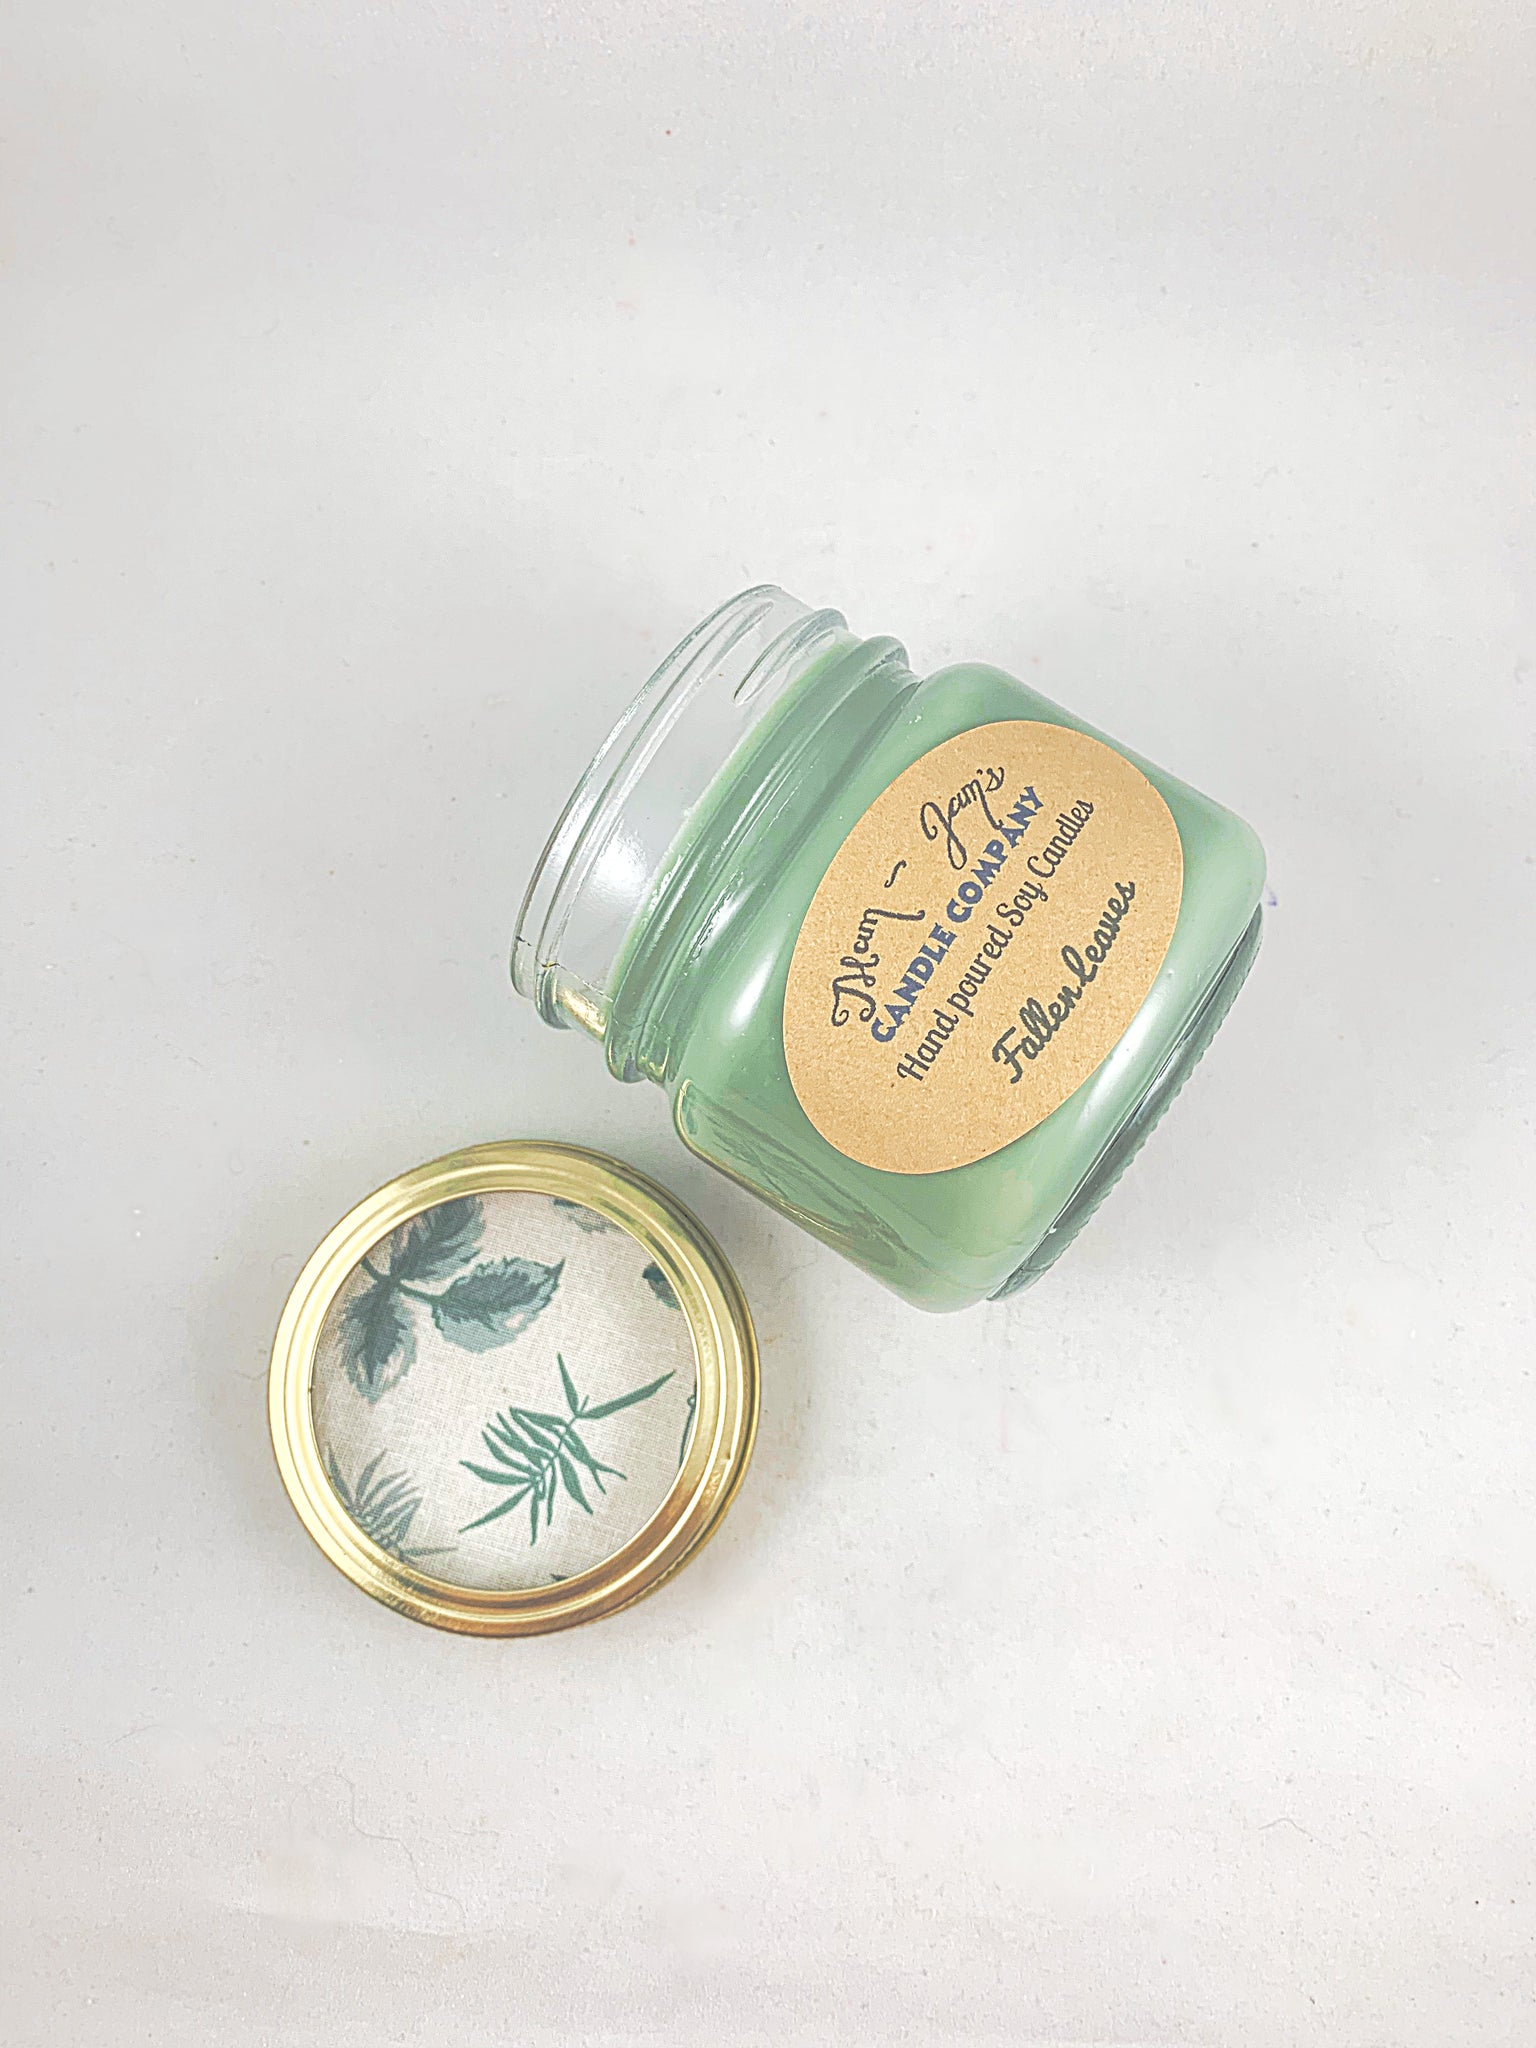 Fallen Leaves - Mam Jam's Candle Company